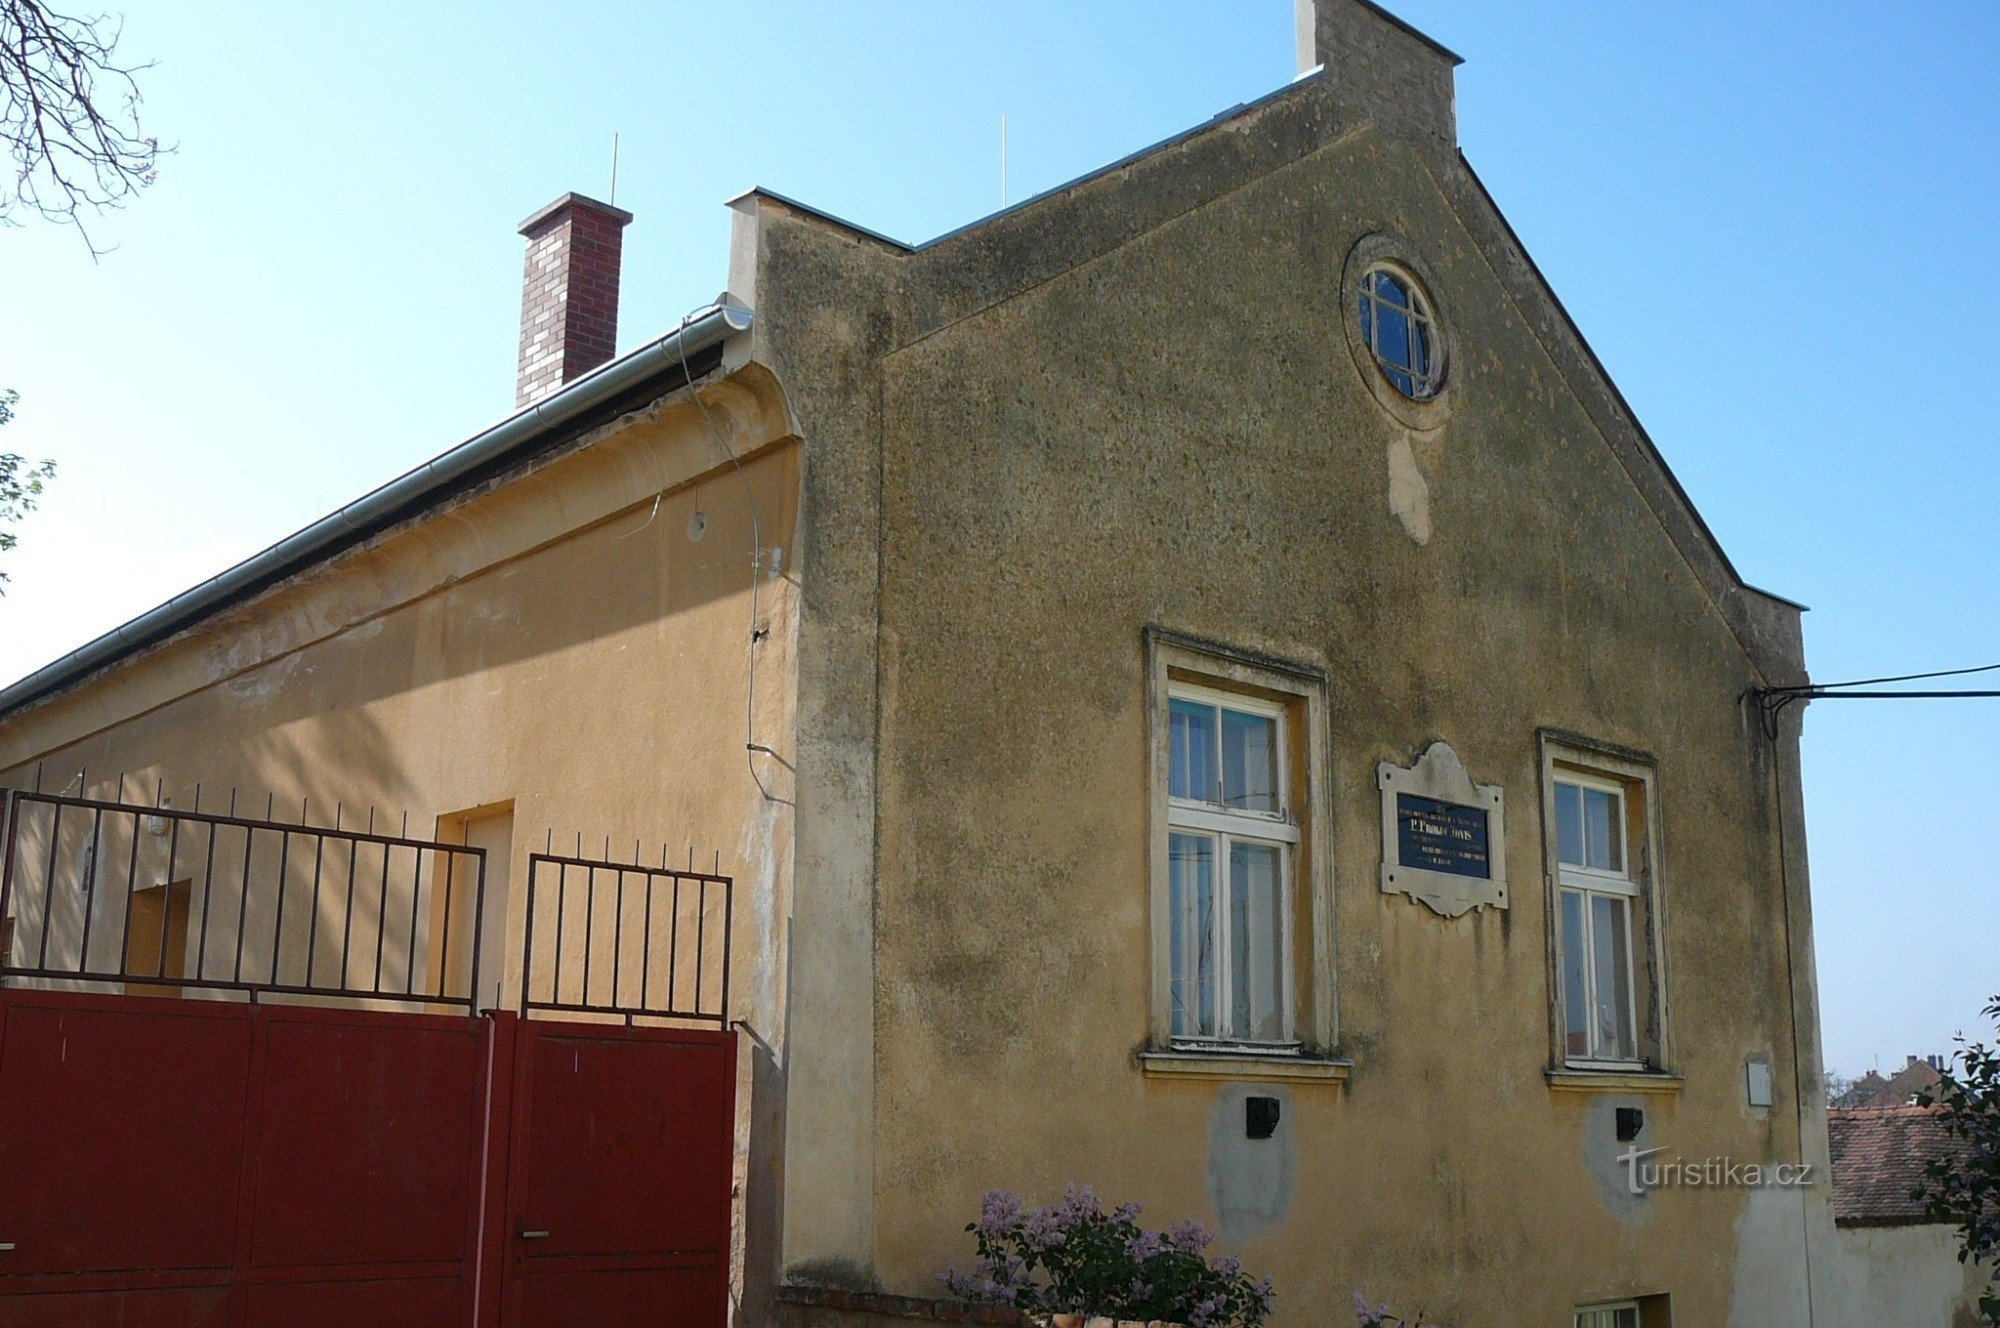 The house in which Prokop Diviš lived during his time in Přímětice